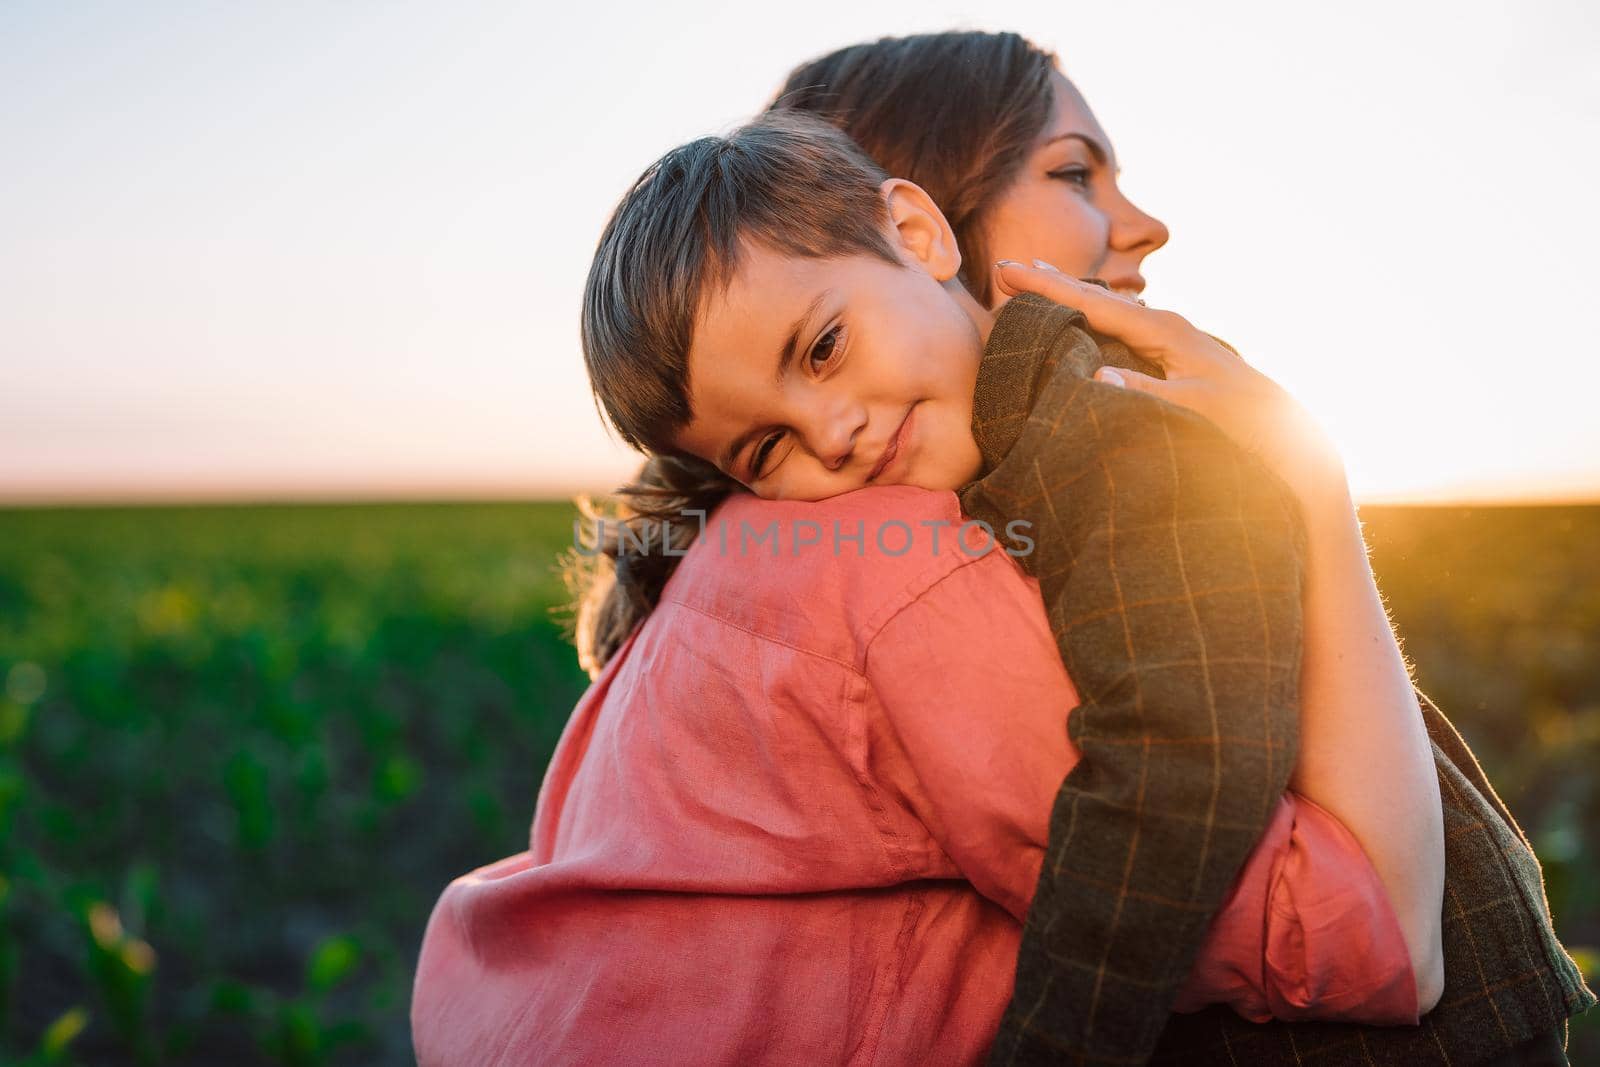 Loving smiling son hugs mom tightly. Tender family scene. Cute 3 year old ukrainian kid with mother. Parenthood, childhood, happiness, children wellbeing concept. High quality photo